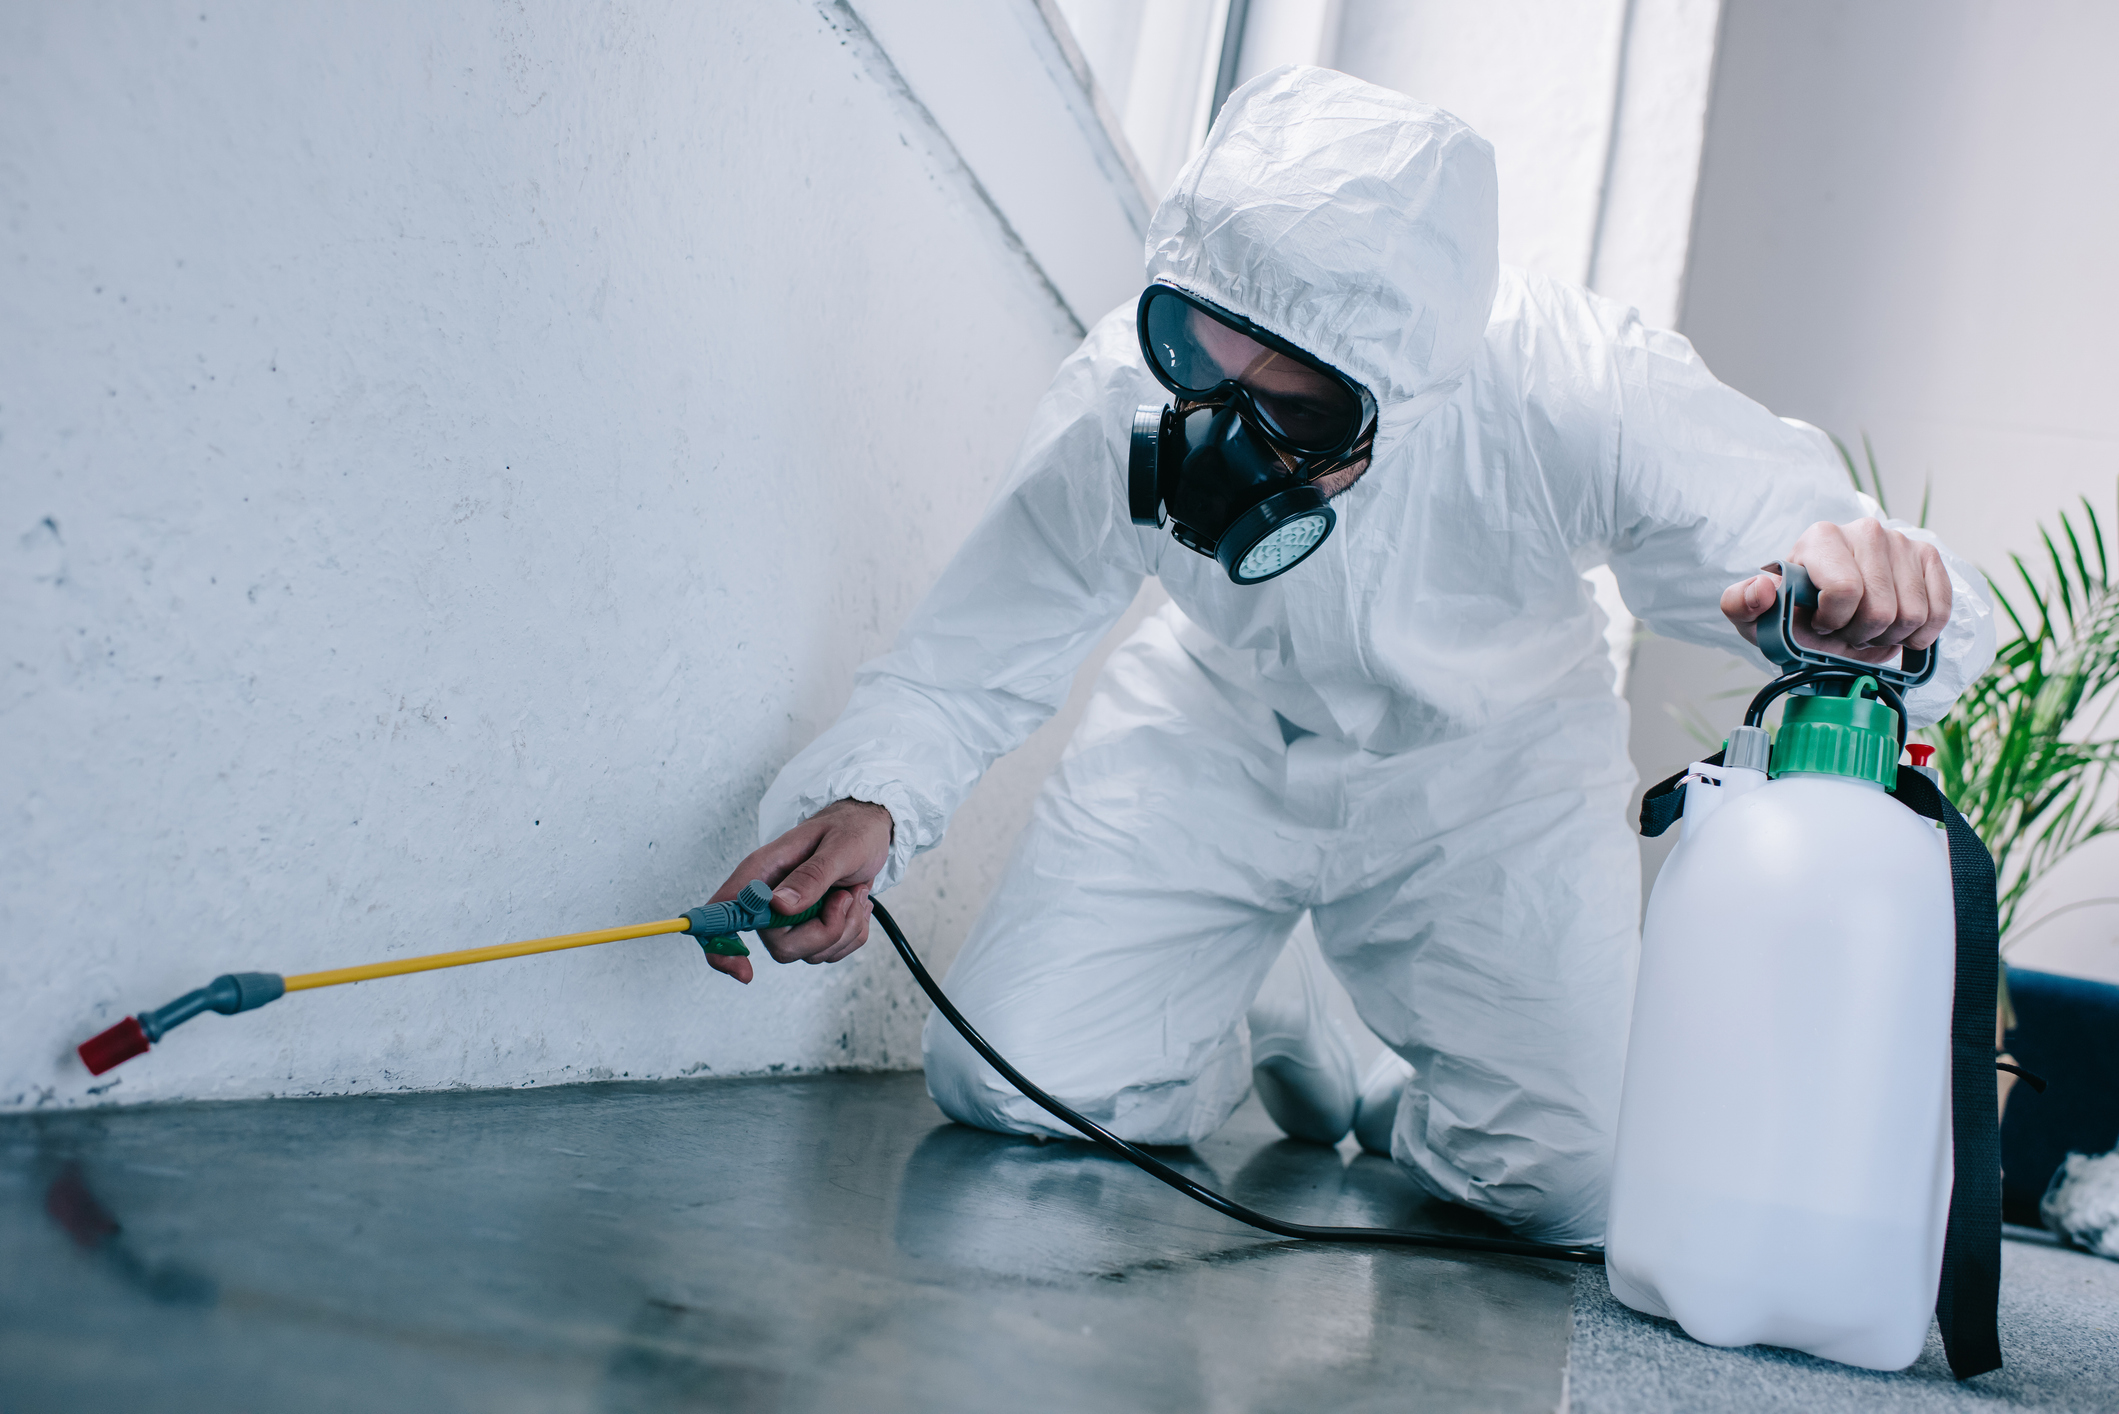  Pest control technician spraying pesticide on the floor inside of a house. 
